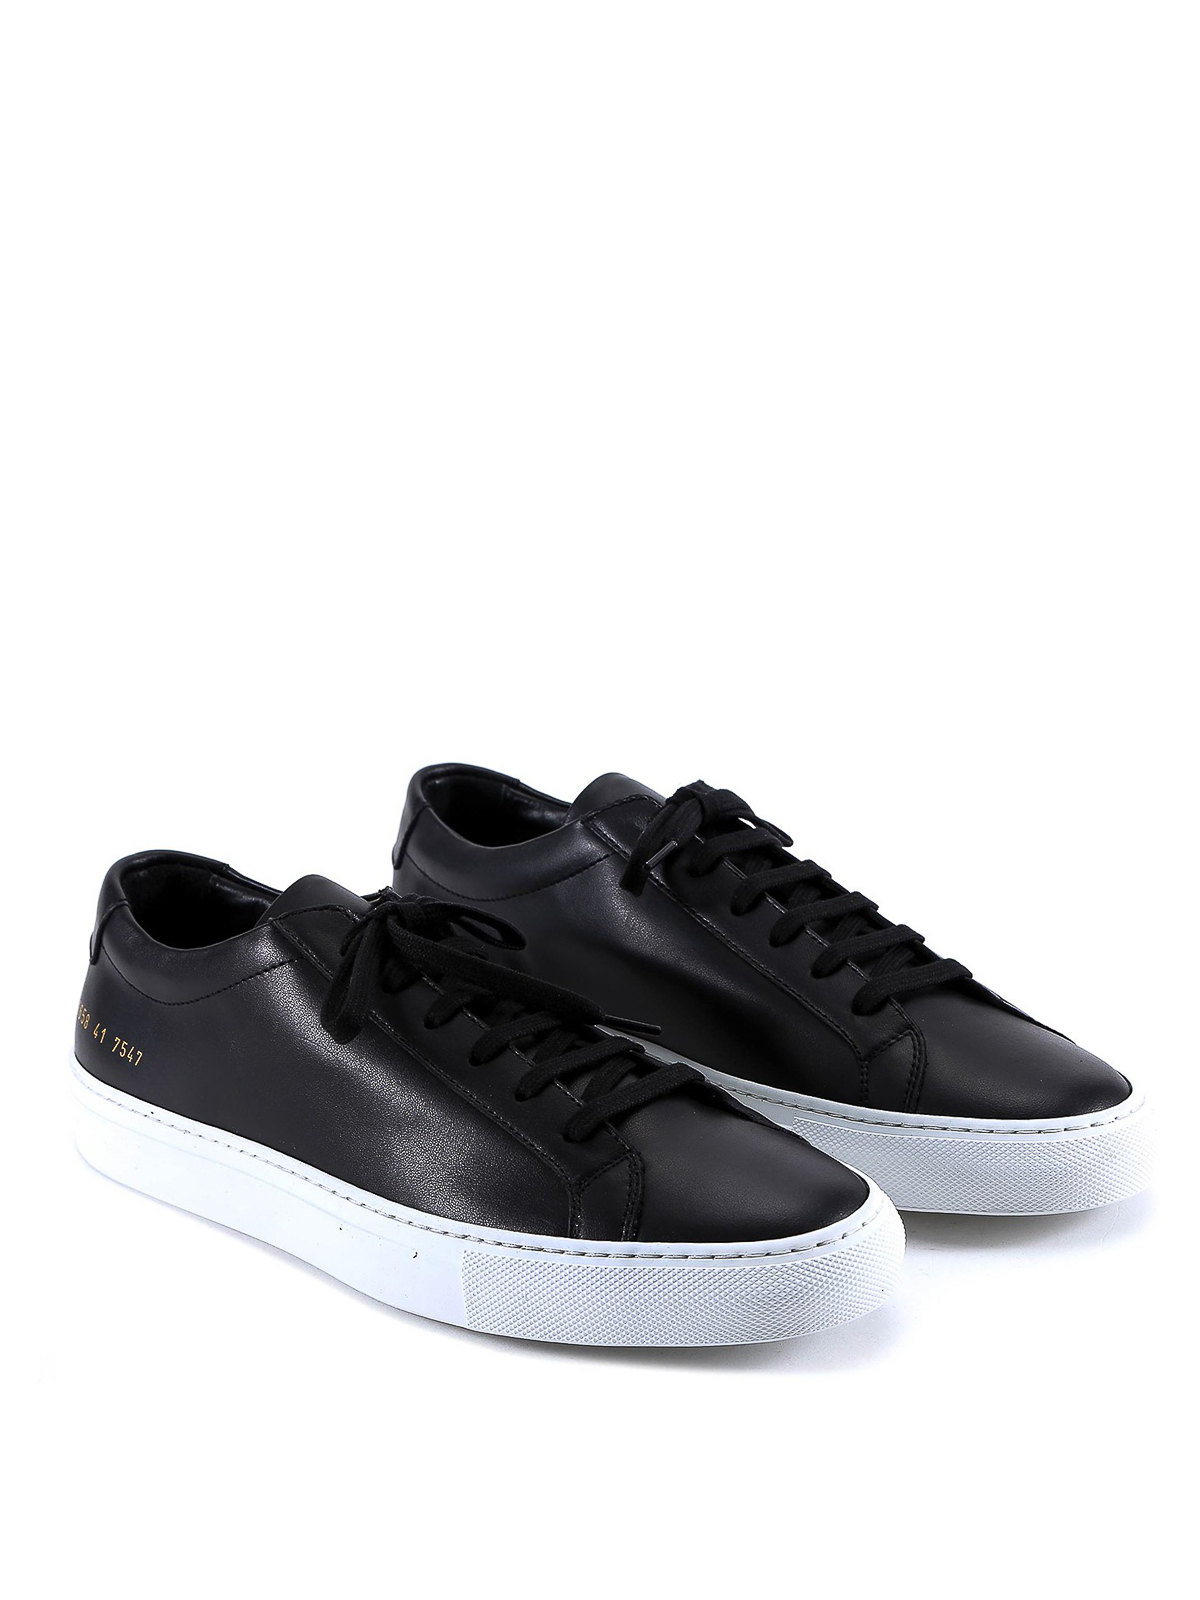 Shop Common Projects Smooth Leather Black Sneakers